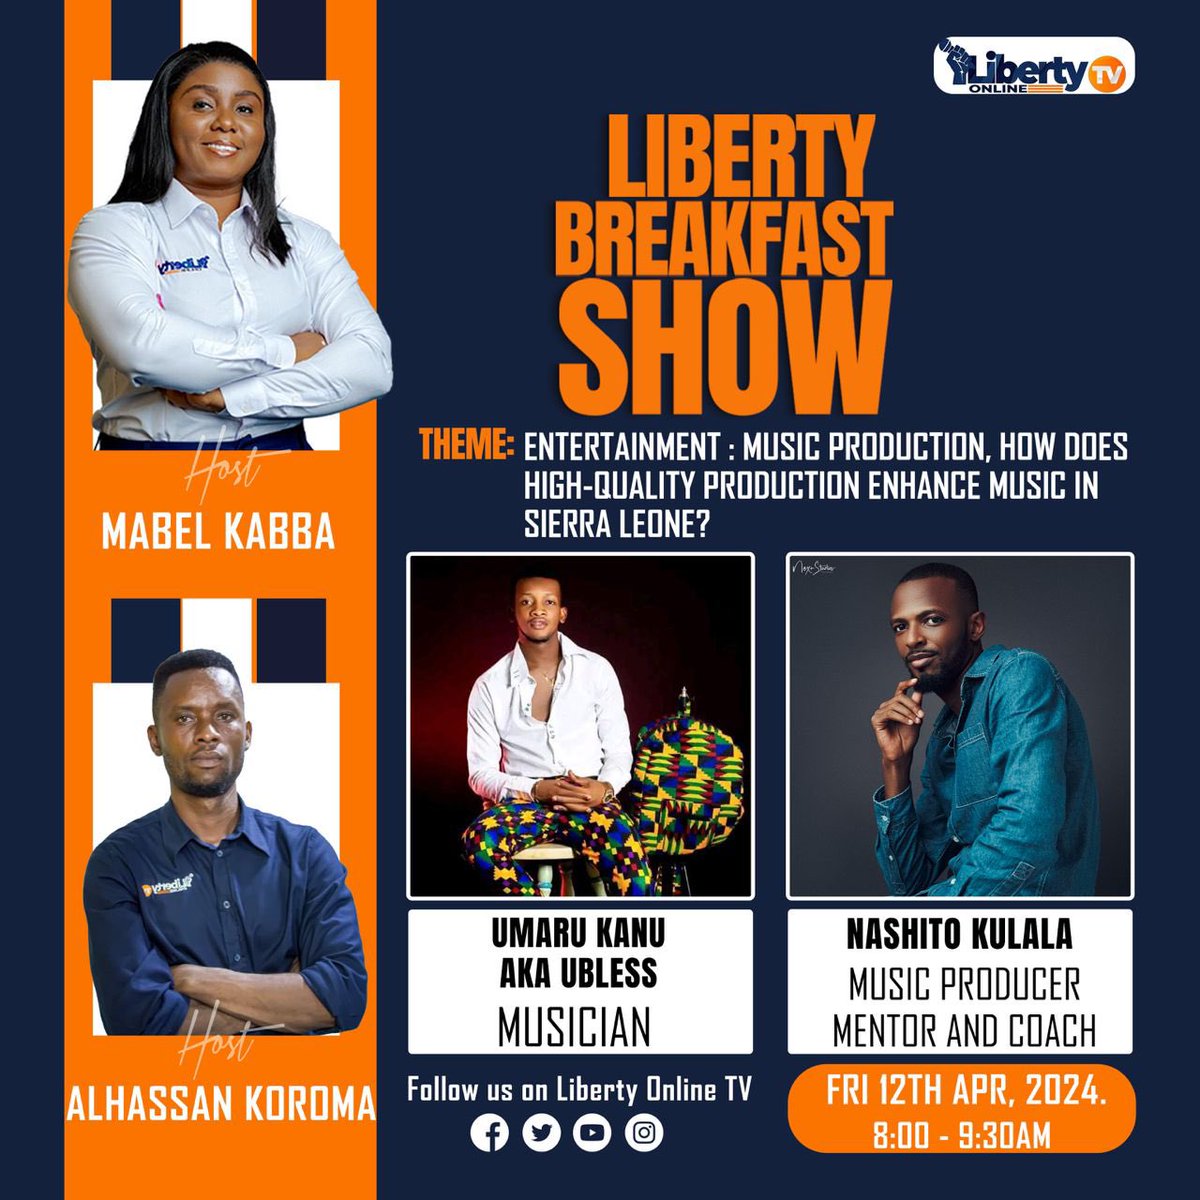 We invite you to join us on tomorrow's Liberty Breakfast Show as we will be hosting two special guests: a talented musician and one of the country's leading mixing and mastering engineers who will discuss the hectic world of music production. Kindly see flyer for more details